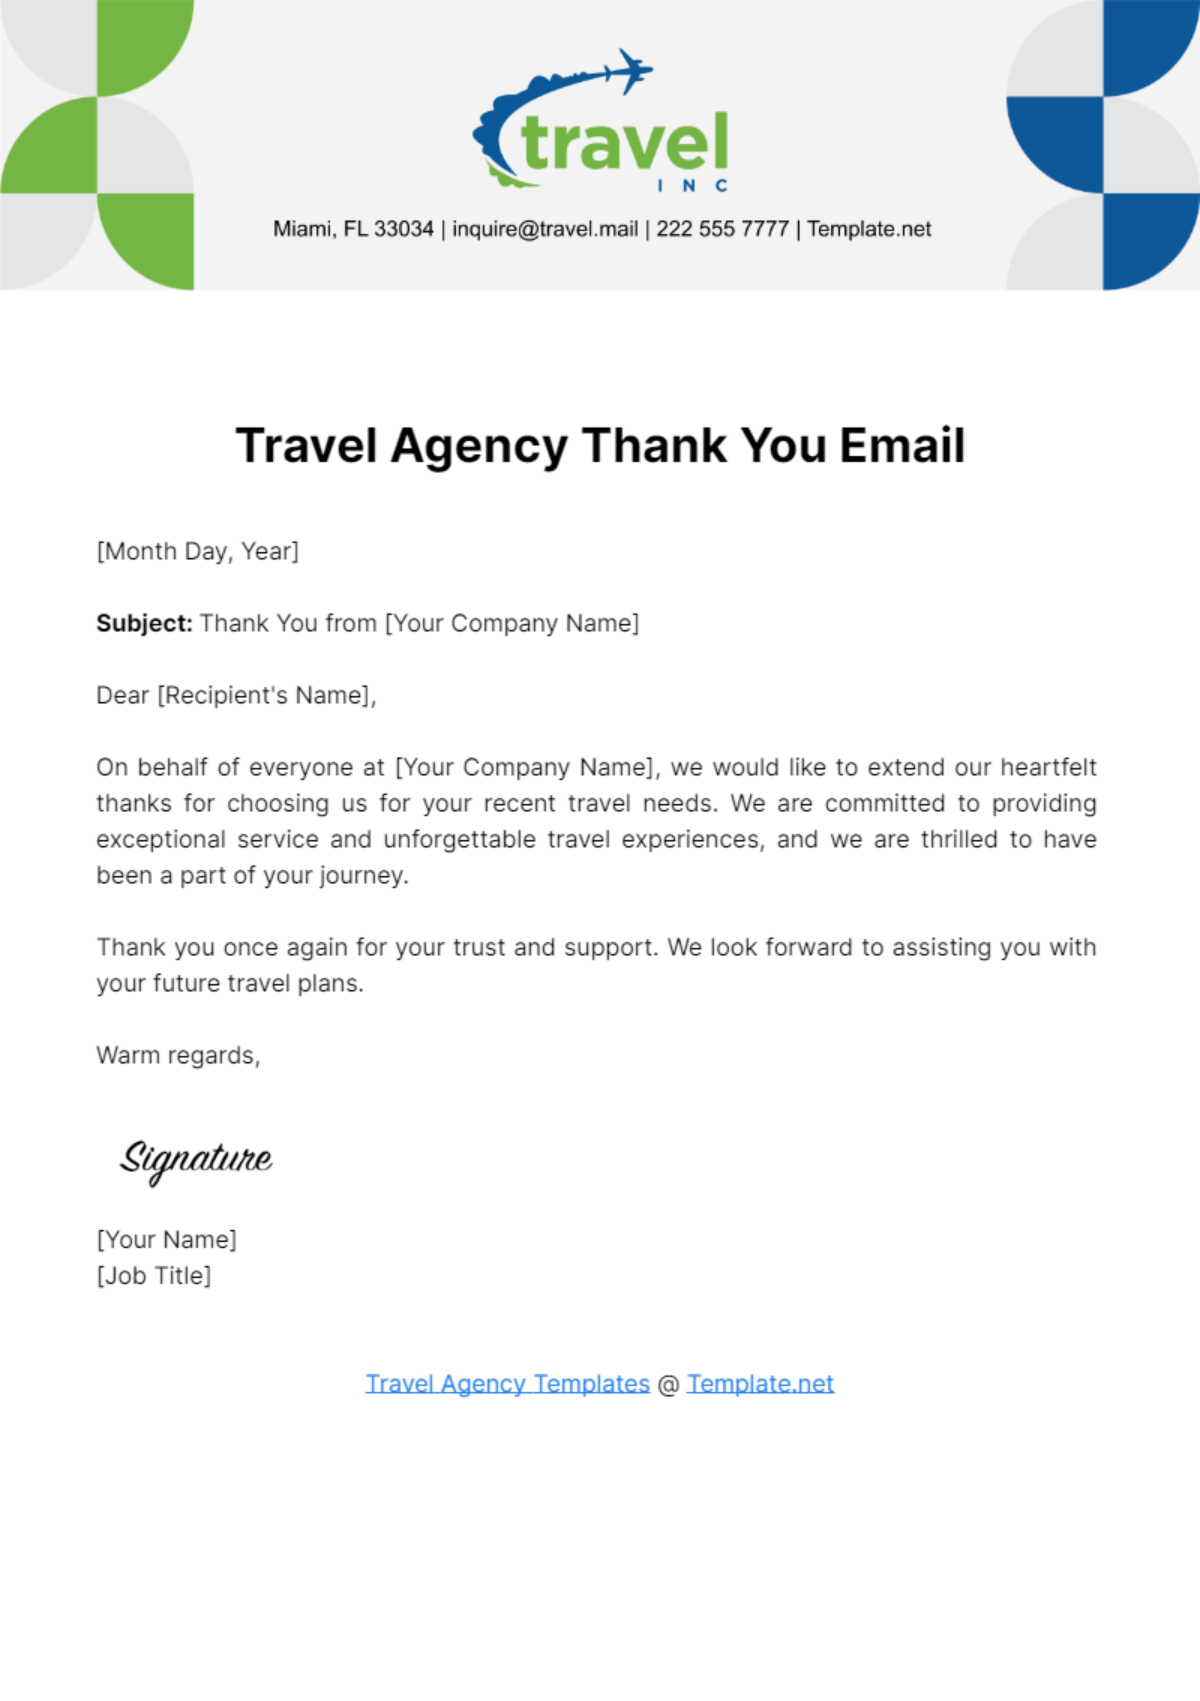 Free Travel Agency Thank You Email Template